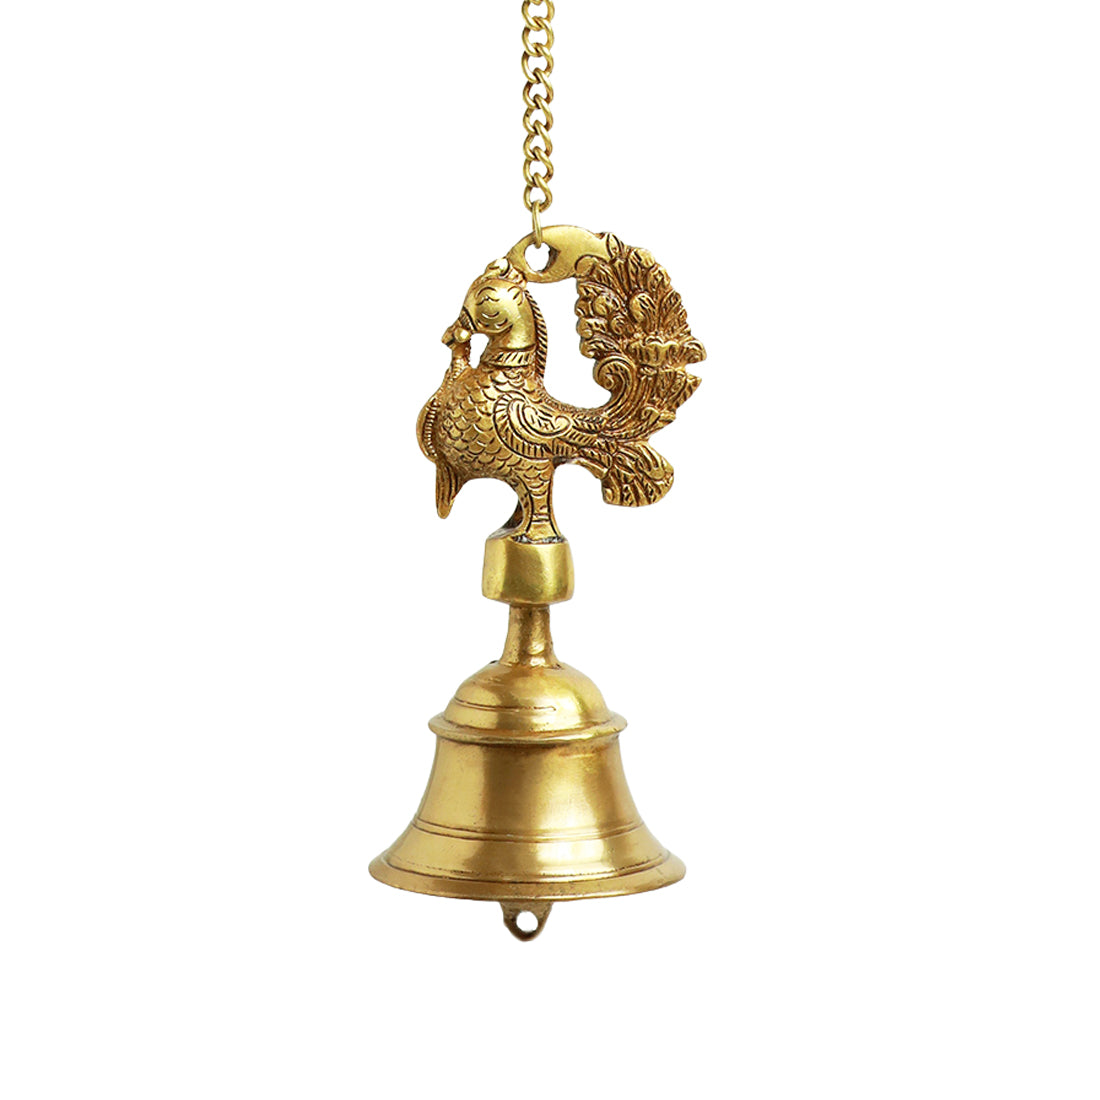 'Elegant Peacock' Hand-Etched Decorative Hanging Bell In Brass